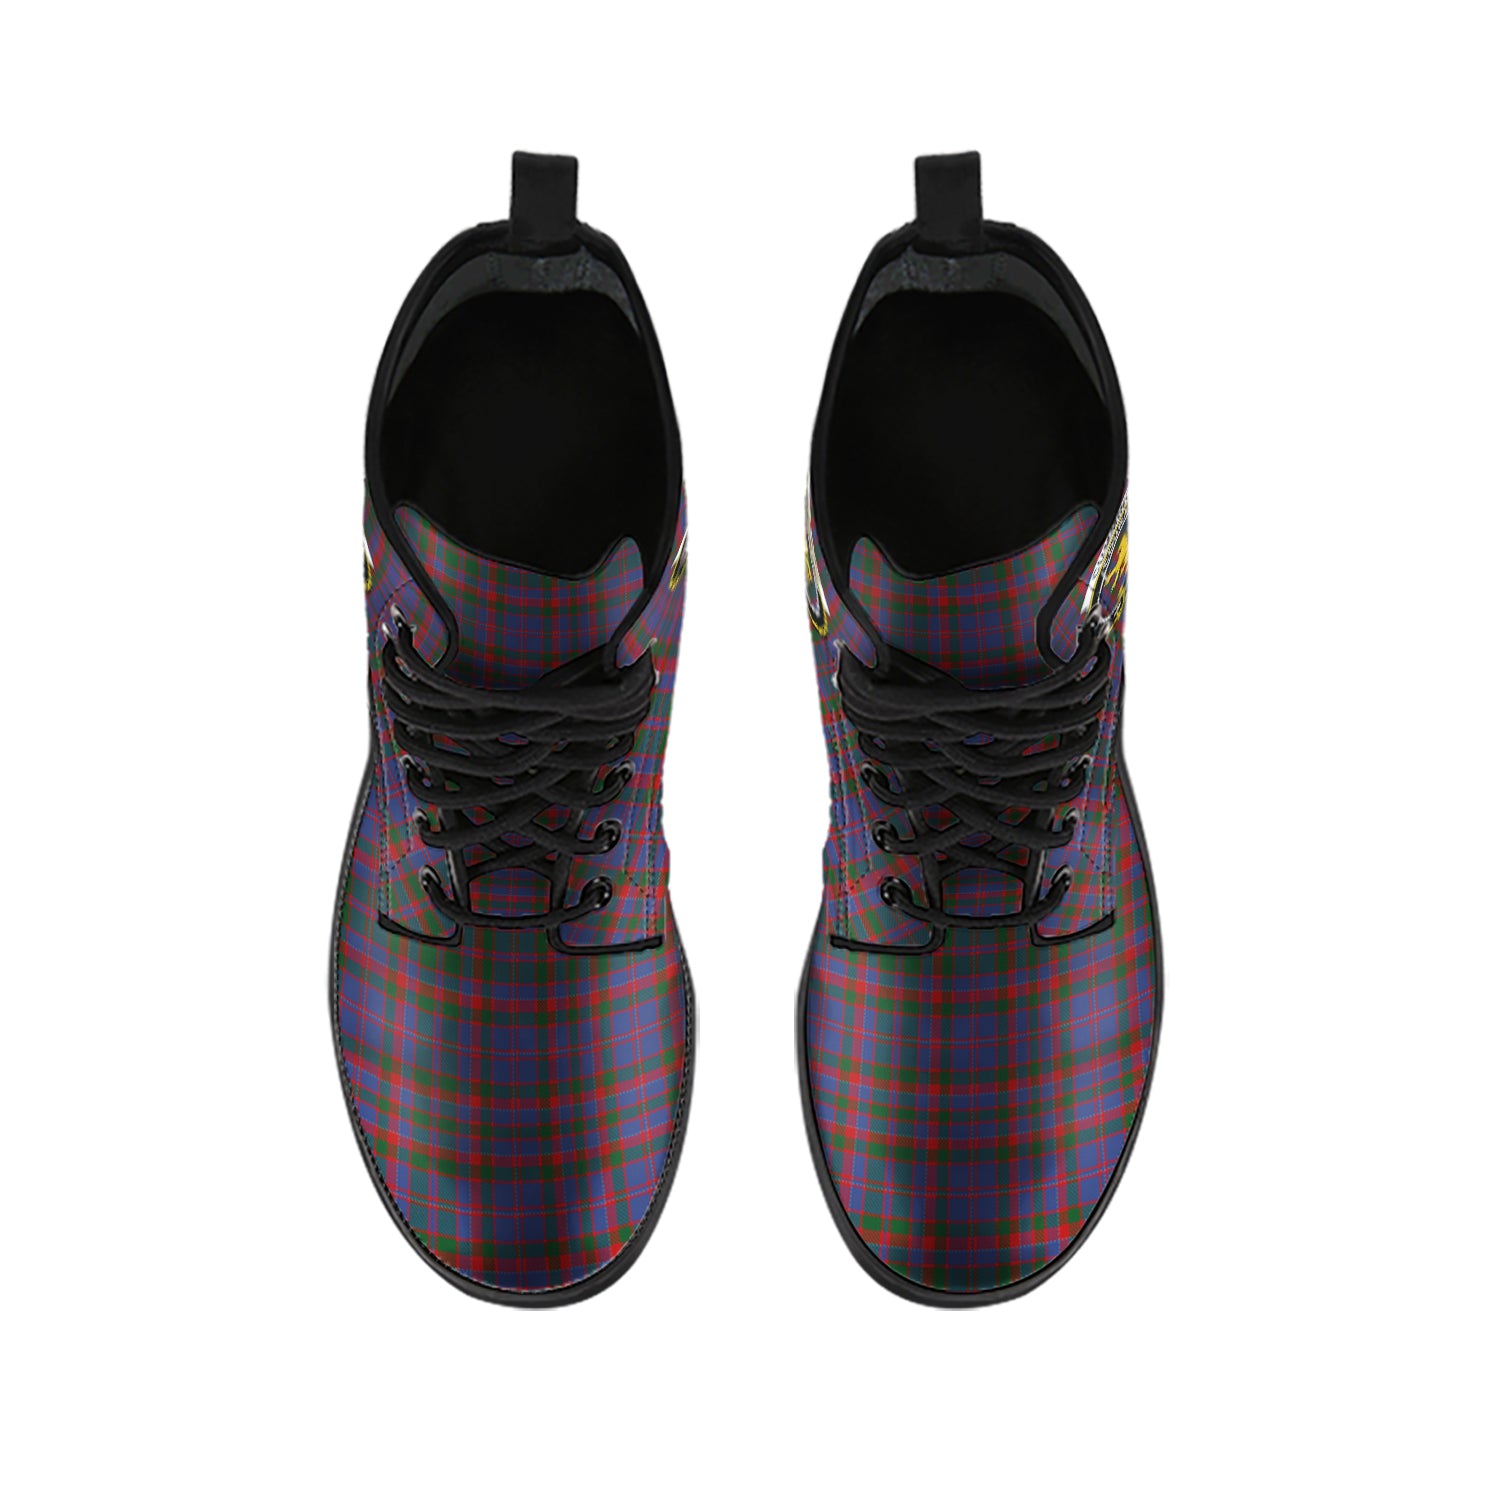 cumming-tartan-leather-boots-with-family-crest